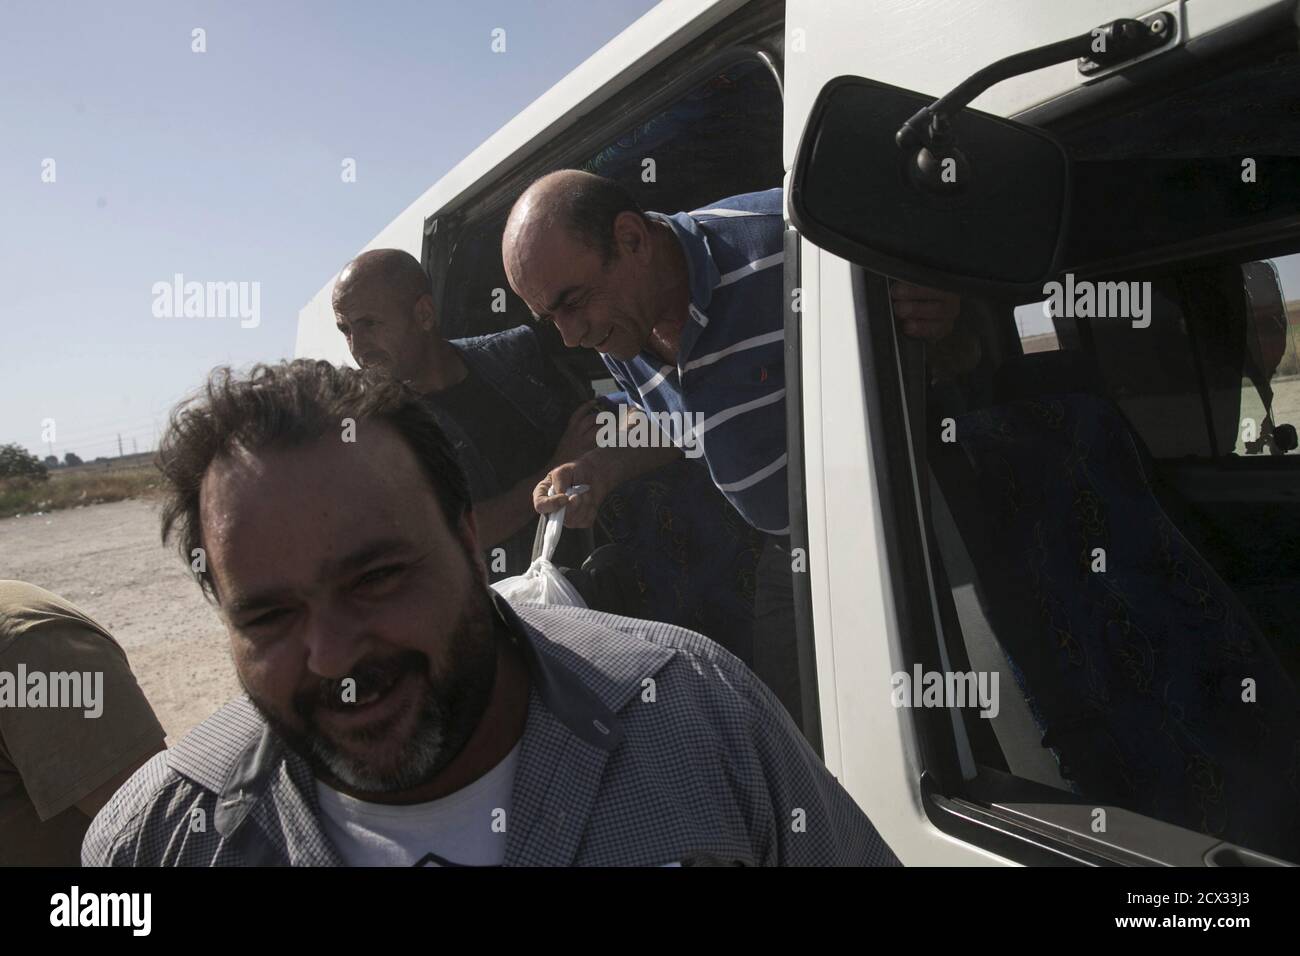 Palestinian labourers with permits to work in Israel step off a minibus as they return to the West Bank at Israel's Eyal checkpoint near the West Bank town of Qalqilya May 20, 2015. Prime Minister Benjamin Netanyahu suspended on Wednesday new bus travel and checkpoint regulations for Palestinian labourers only hours after they were imposed to an outcry by critics accusing Israel of racial segregation. REUTERS/Baz Ratner Stock Photo